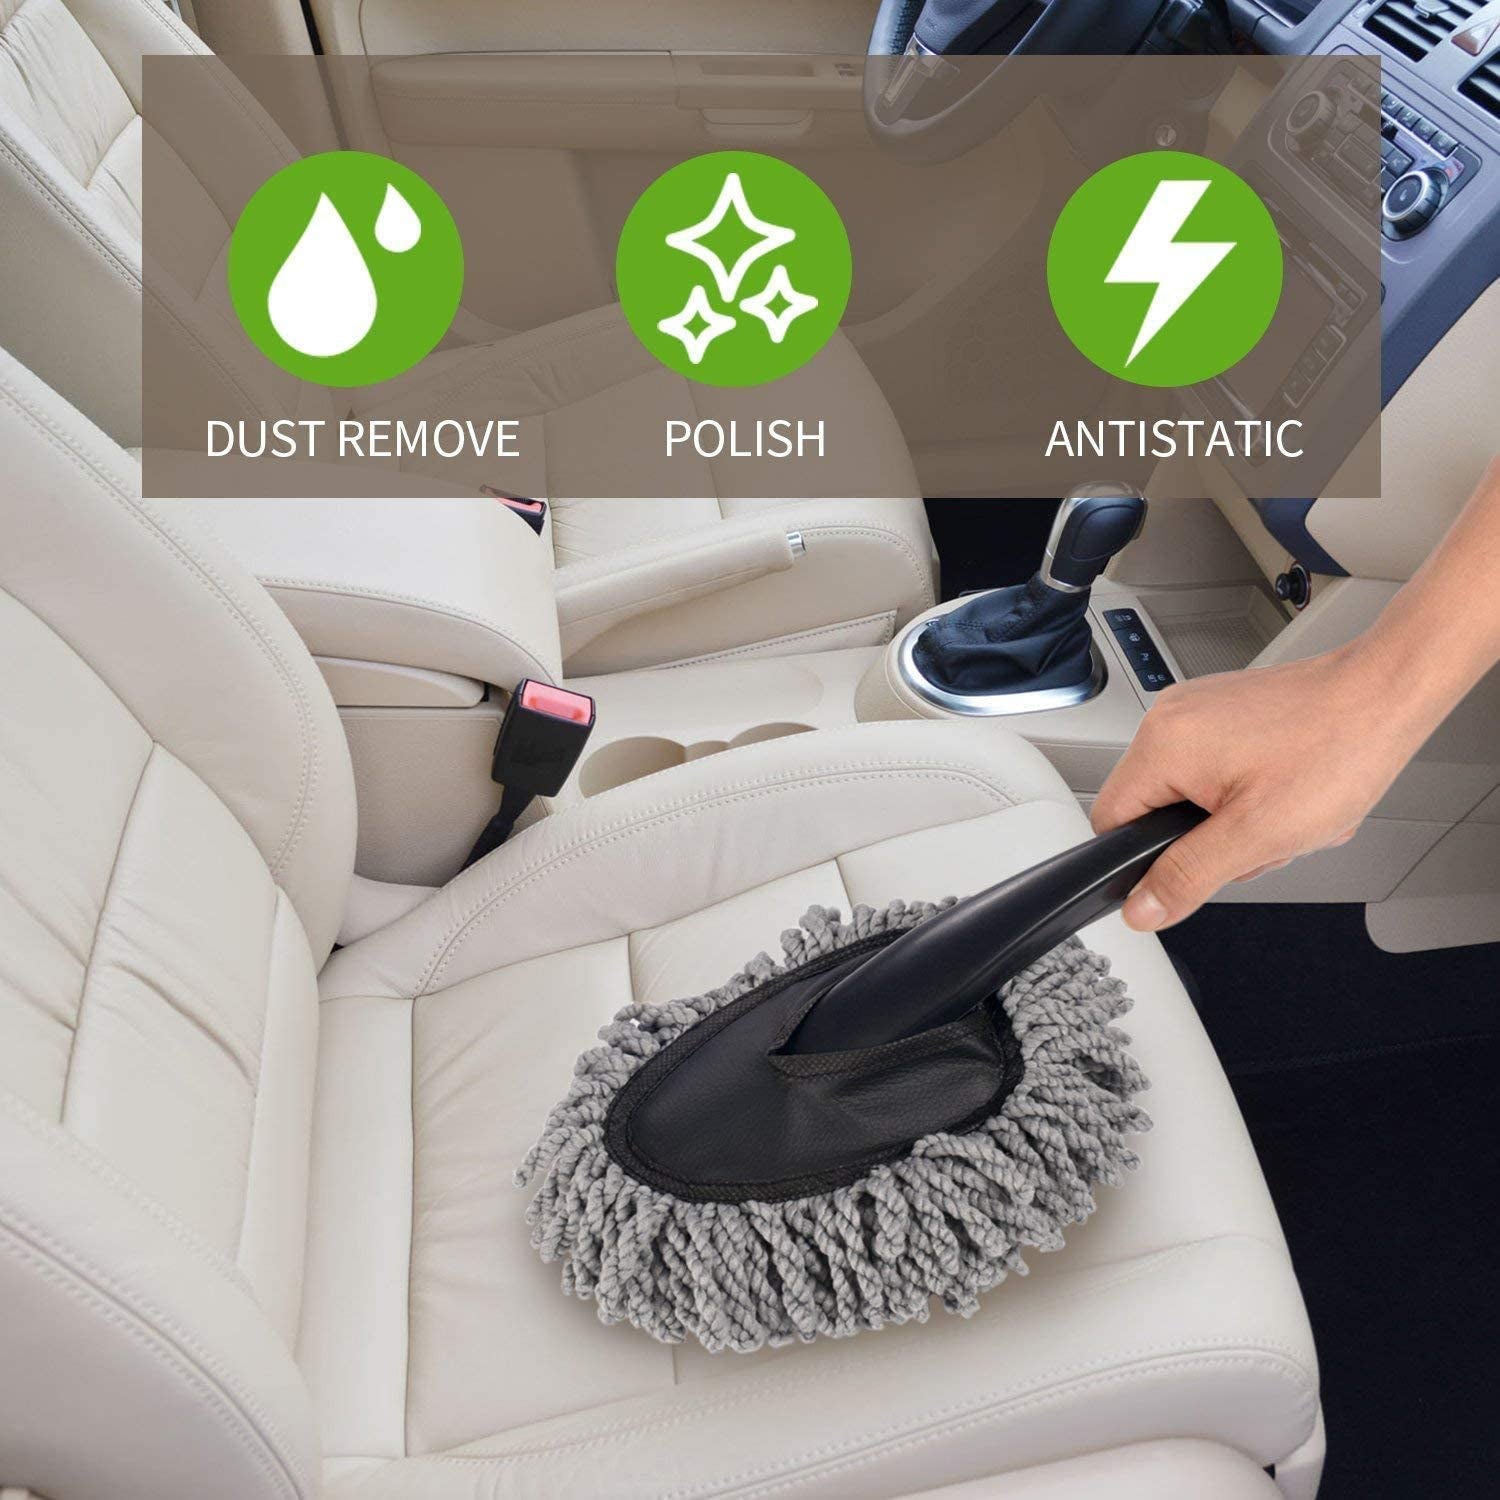 Car Wash Cleaning Brush Microfiber Dusting Tool Duster Dust Mop Home Cleaning For Cleaning and Washing of Dirty Car Glasses, Windows and Exterior